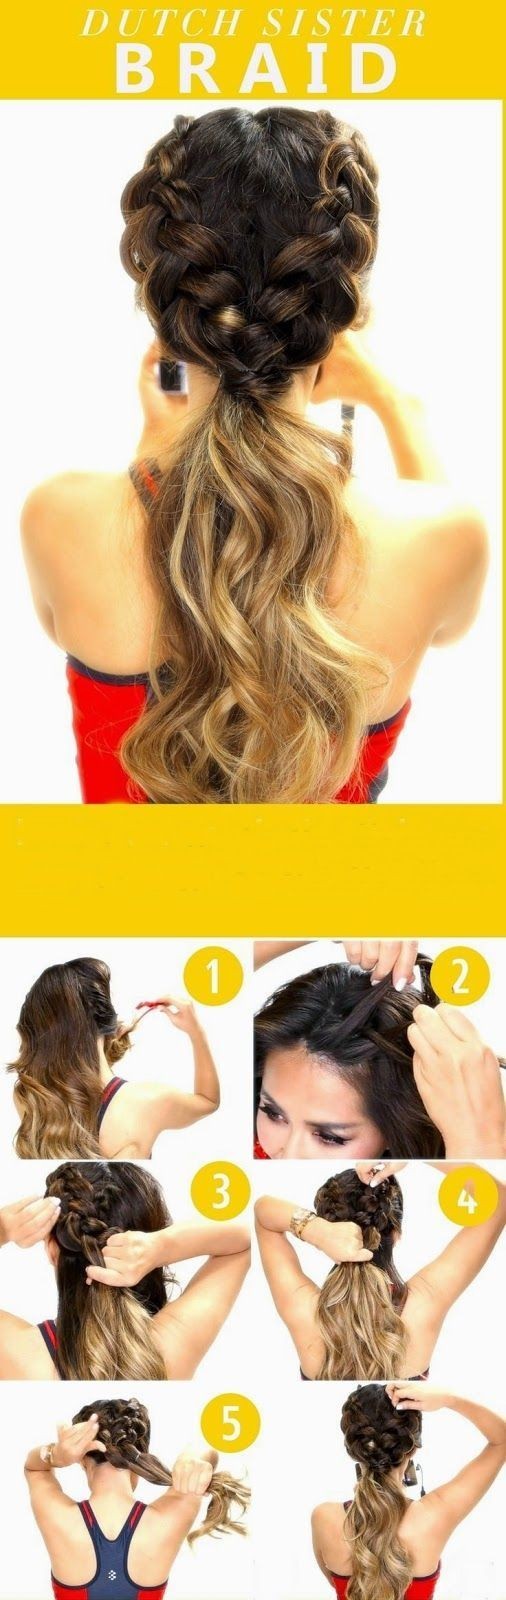 10 Super-Trendy Easy Hairstyles for School - PoPular Haircuts